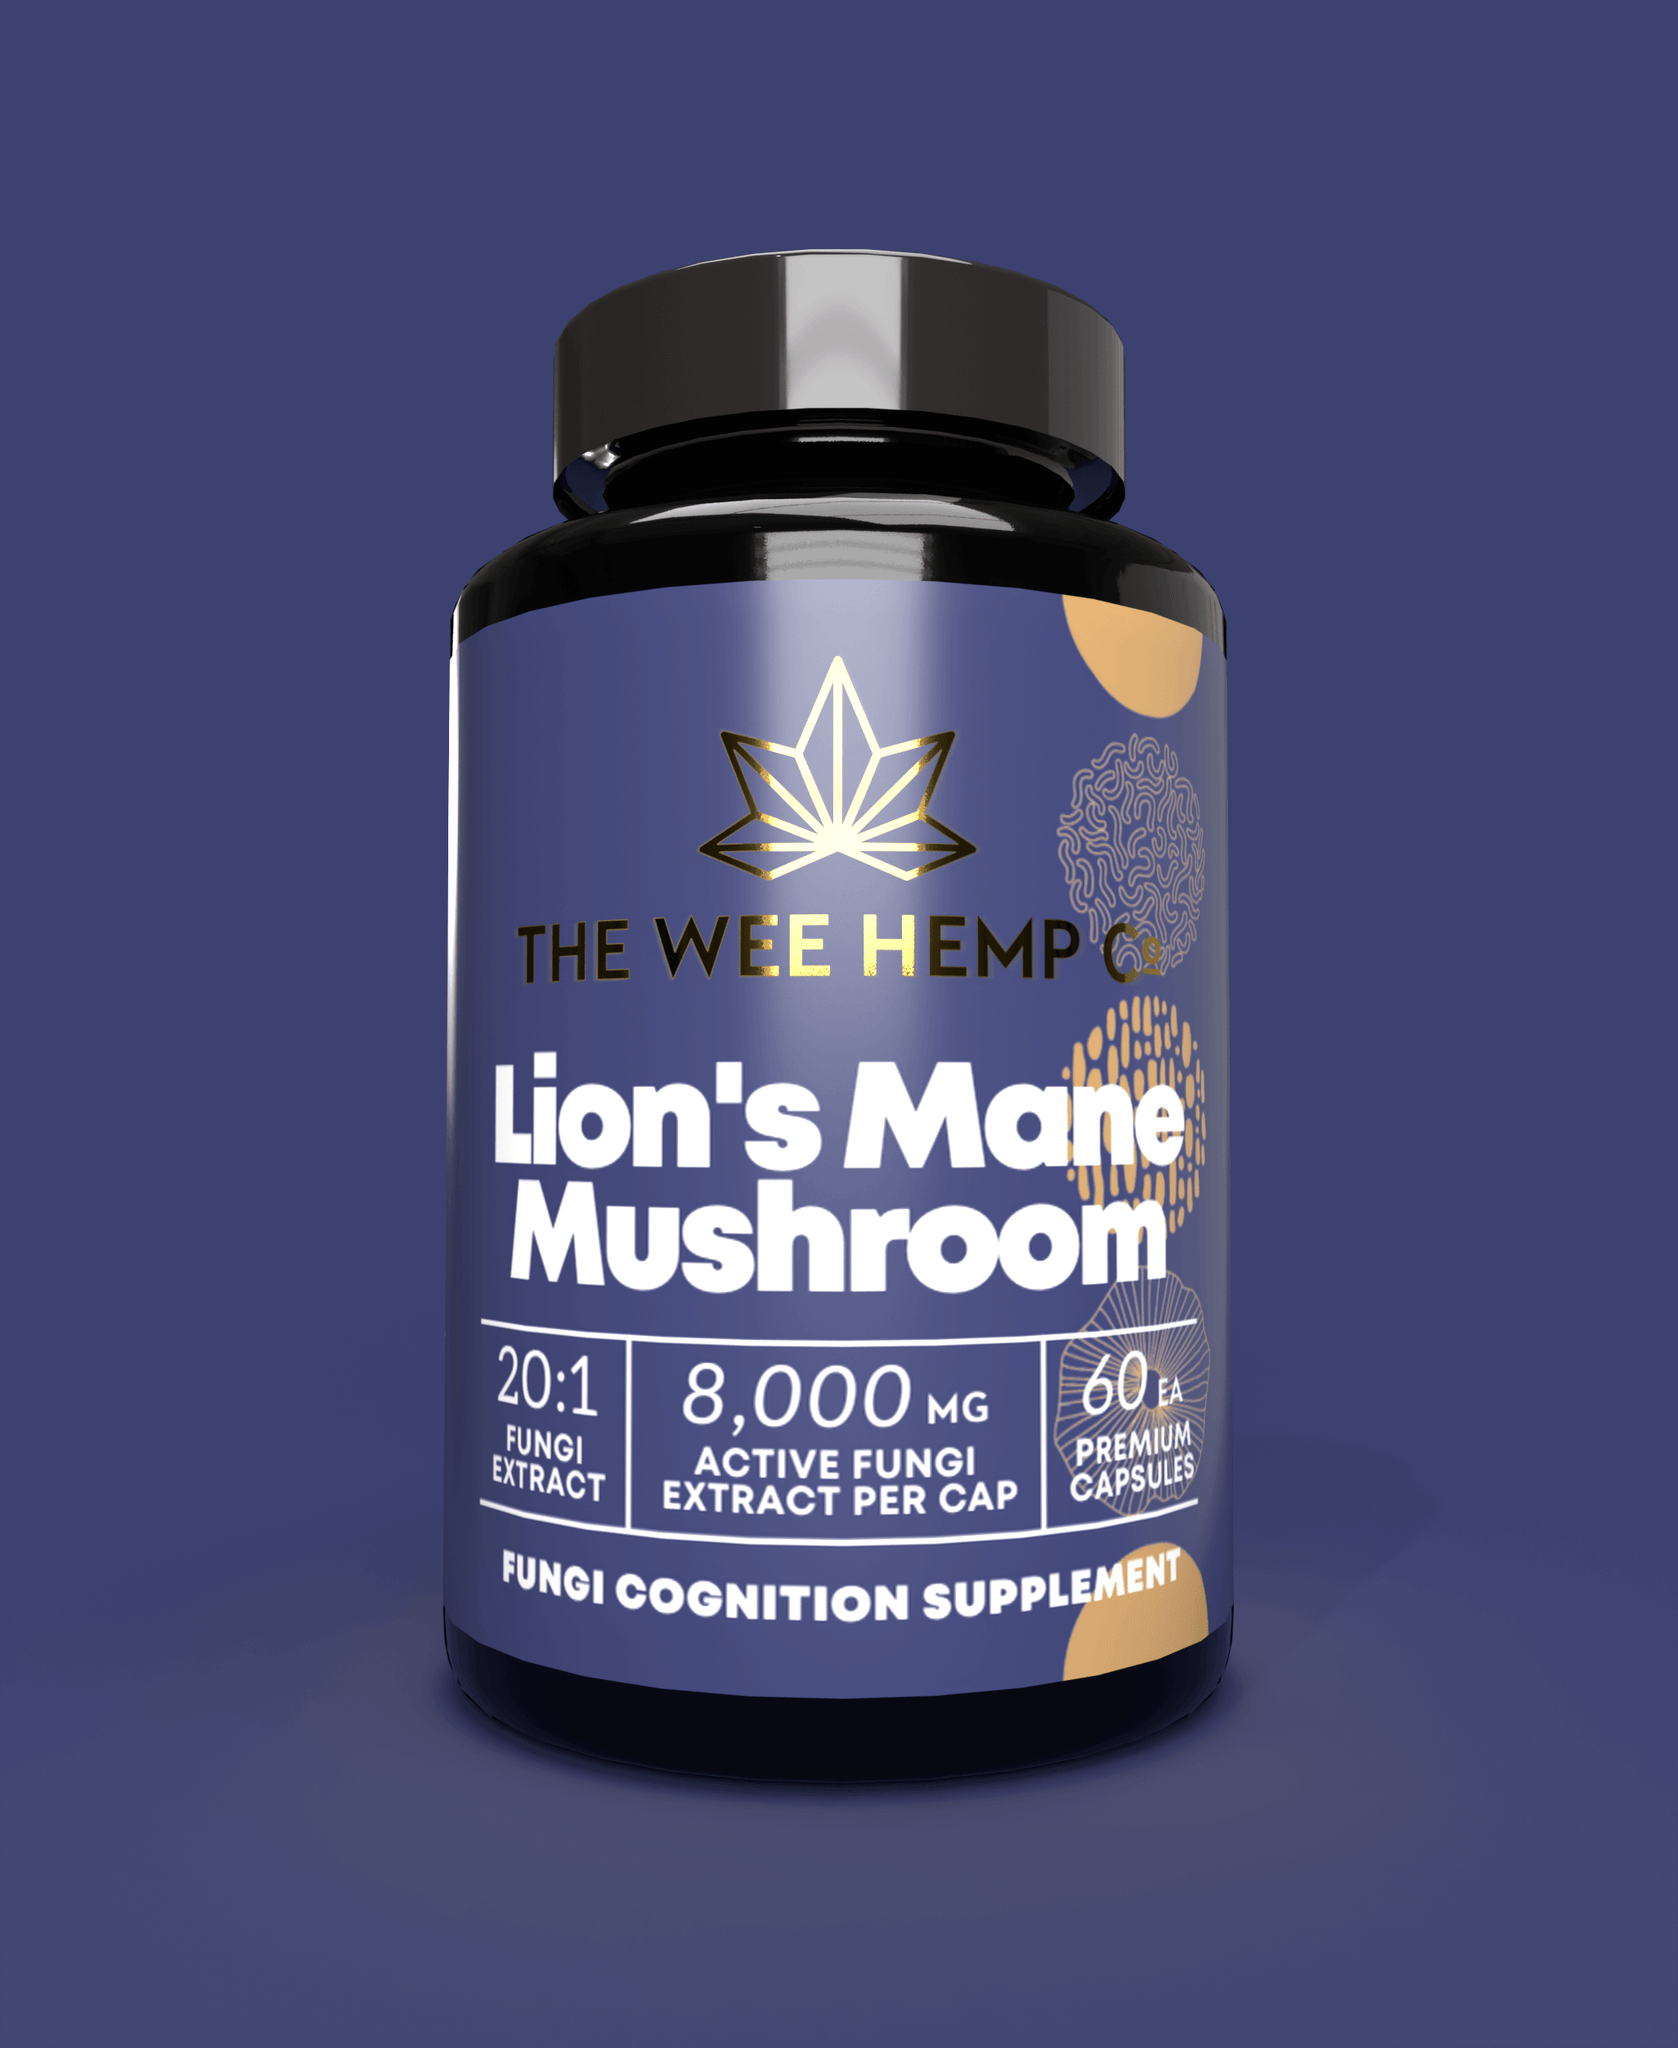 Lion's Mane Mushroom Clean Extract, No Bulking Agents. The Wee Hemp Company, Aberdeenshire, Scotland. Blue background with mushroom supplements in foreground. Scotland's Leading CBD Company.